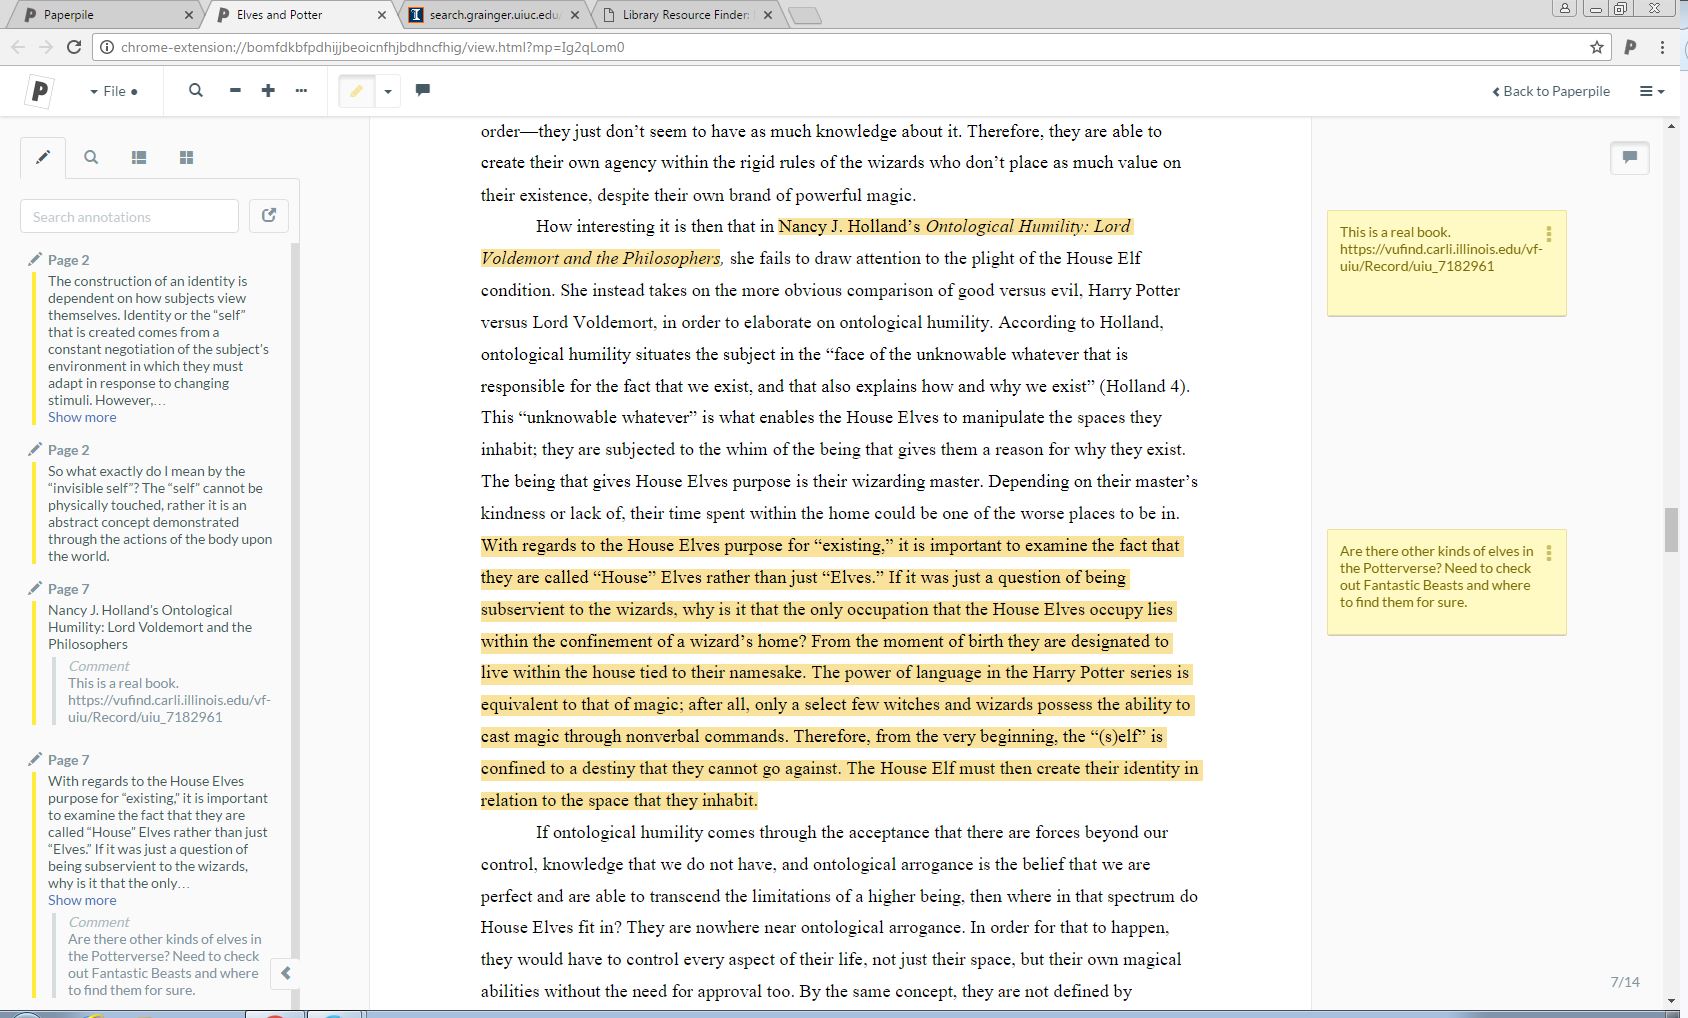 Highlighted text with annotations in the Paperpile app